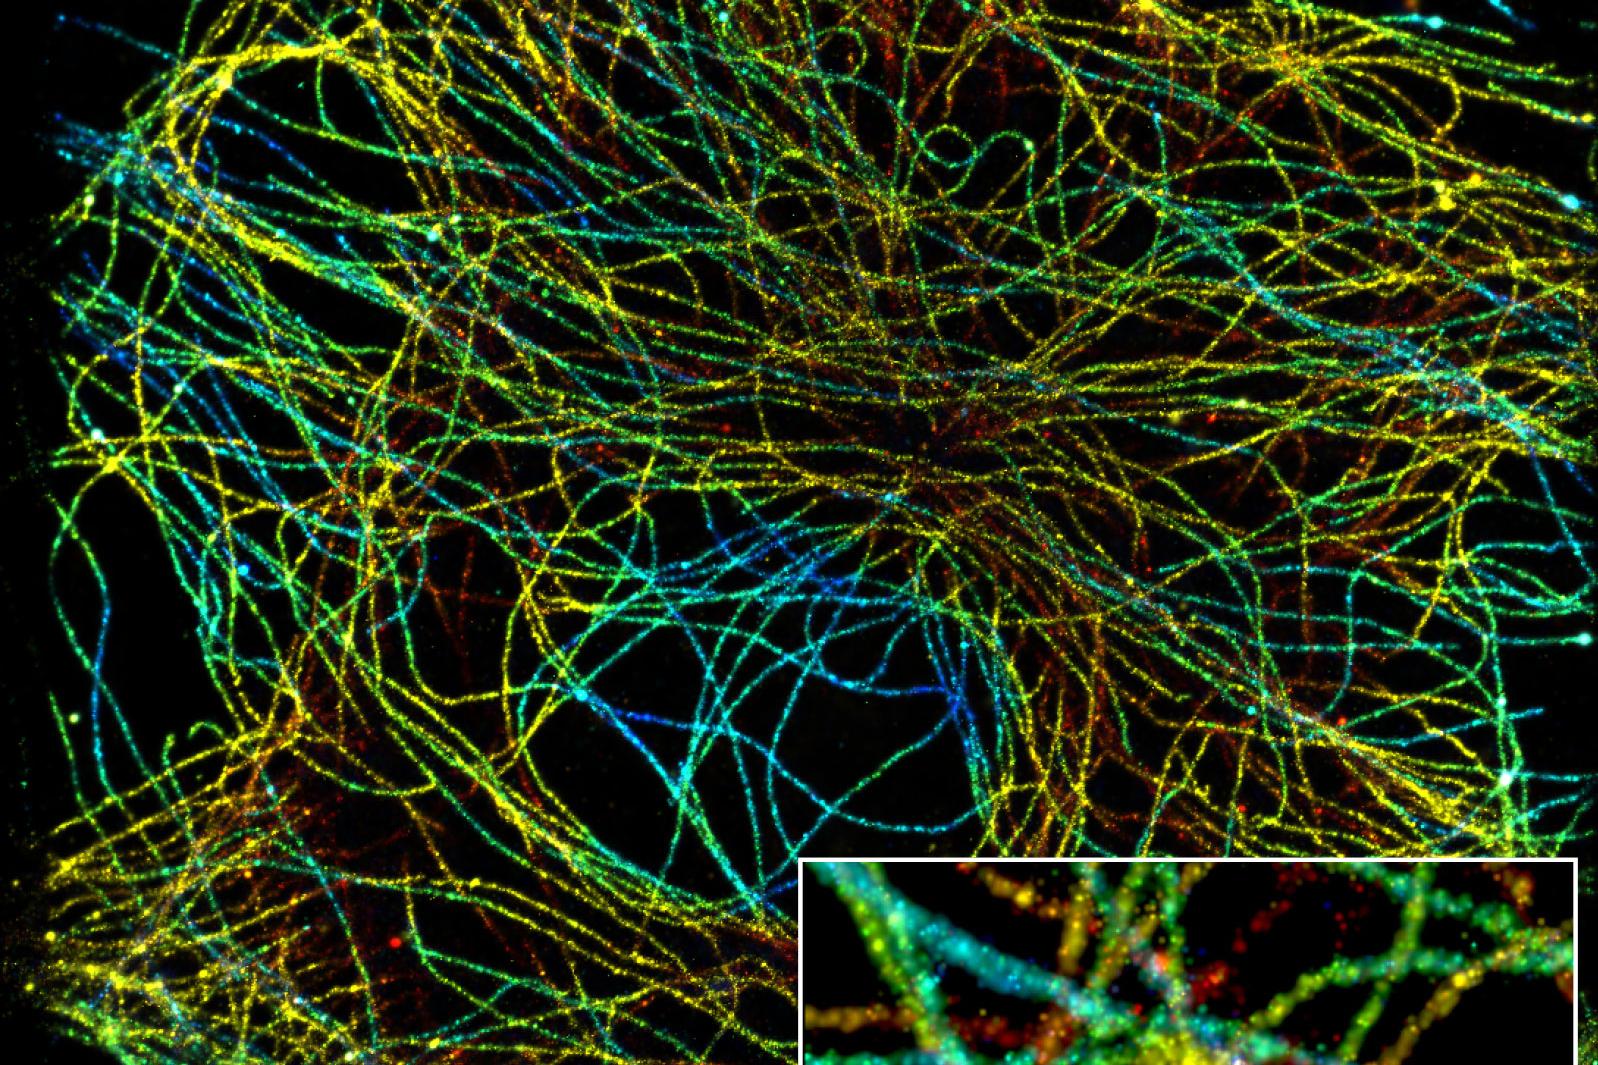 SMLM: With Elyra 7 you can image a z-depth of 1.4 µm in a single acquisition.